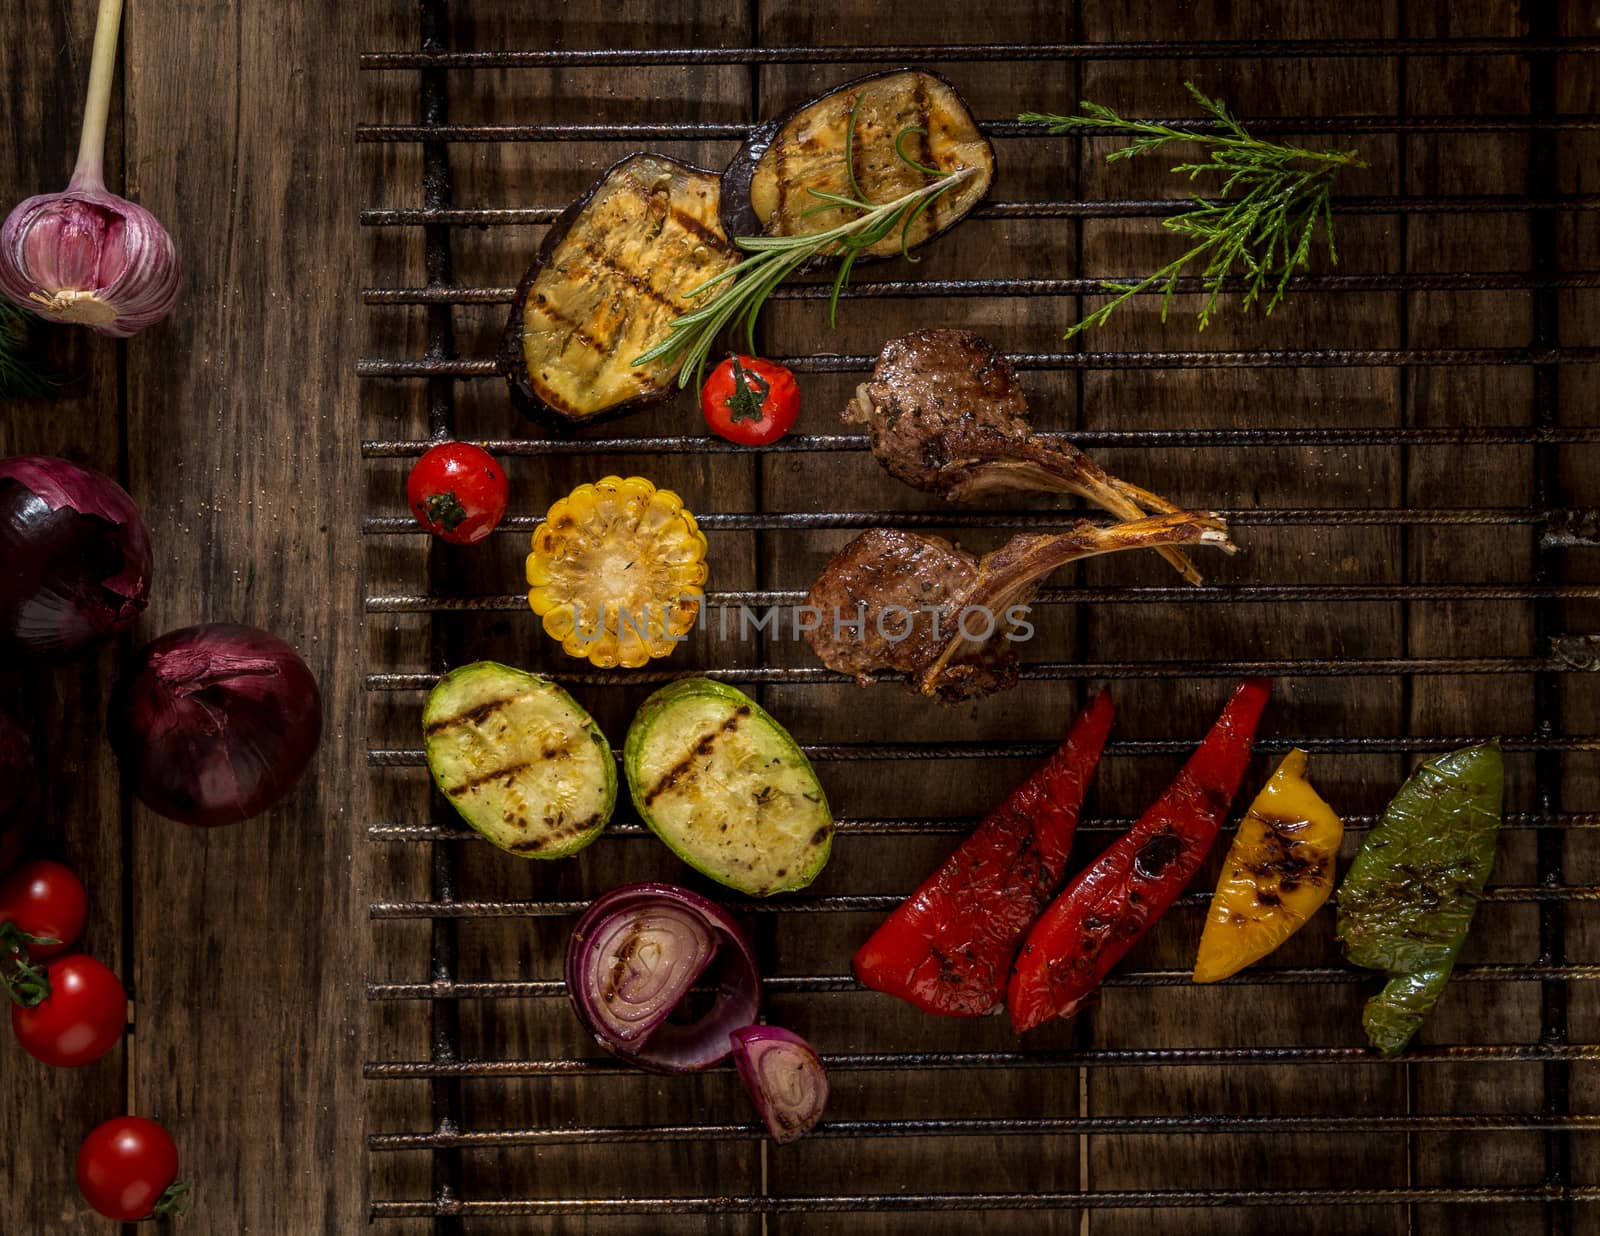 grilled meat and vegetables on a metal lattice, top view. wooden background